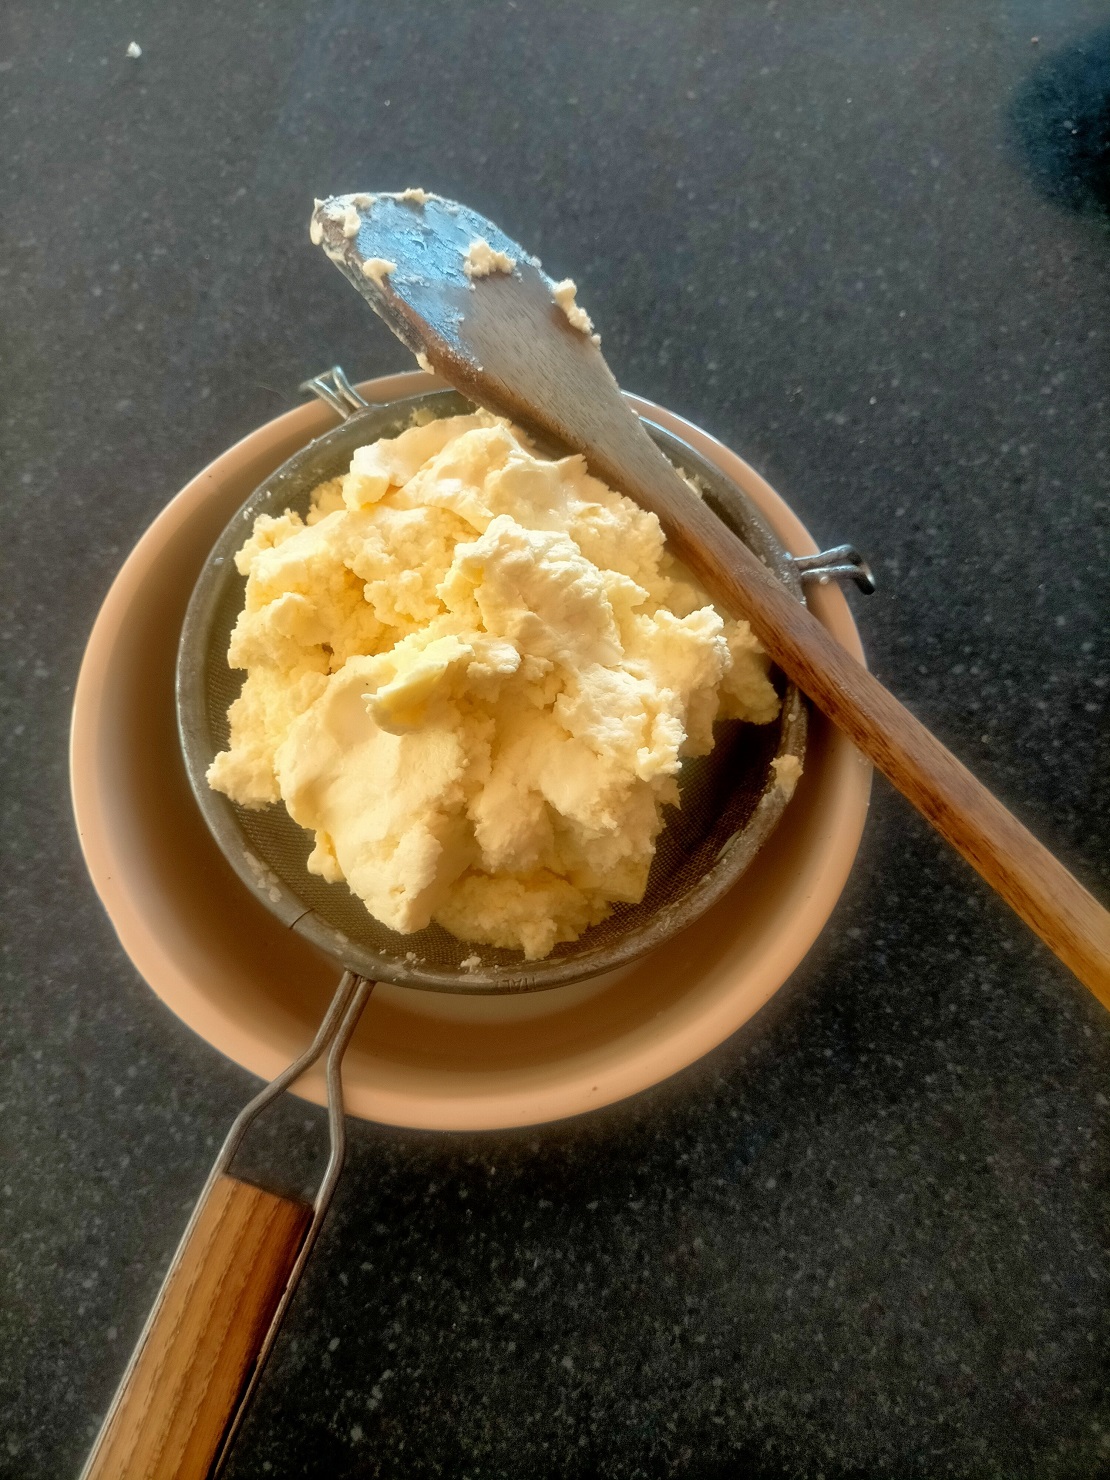 Line a colander or sieve with a clean piece of butter muslin, place the sieve over a bowl to...